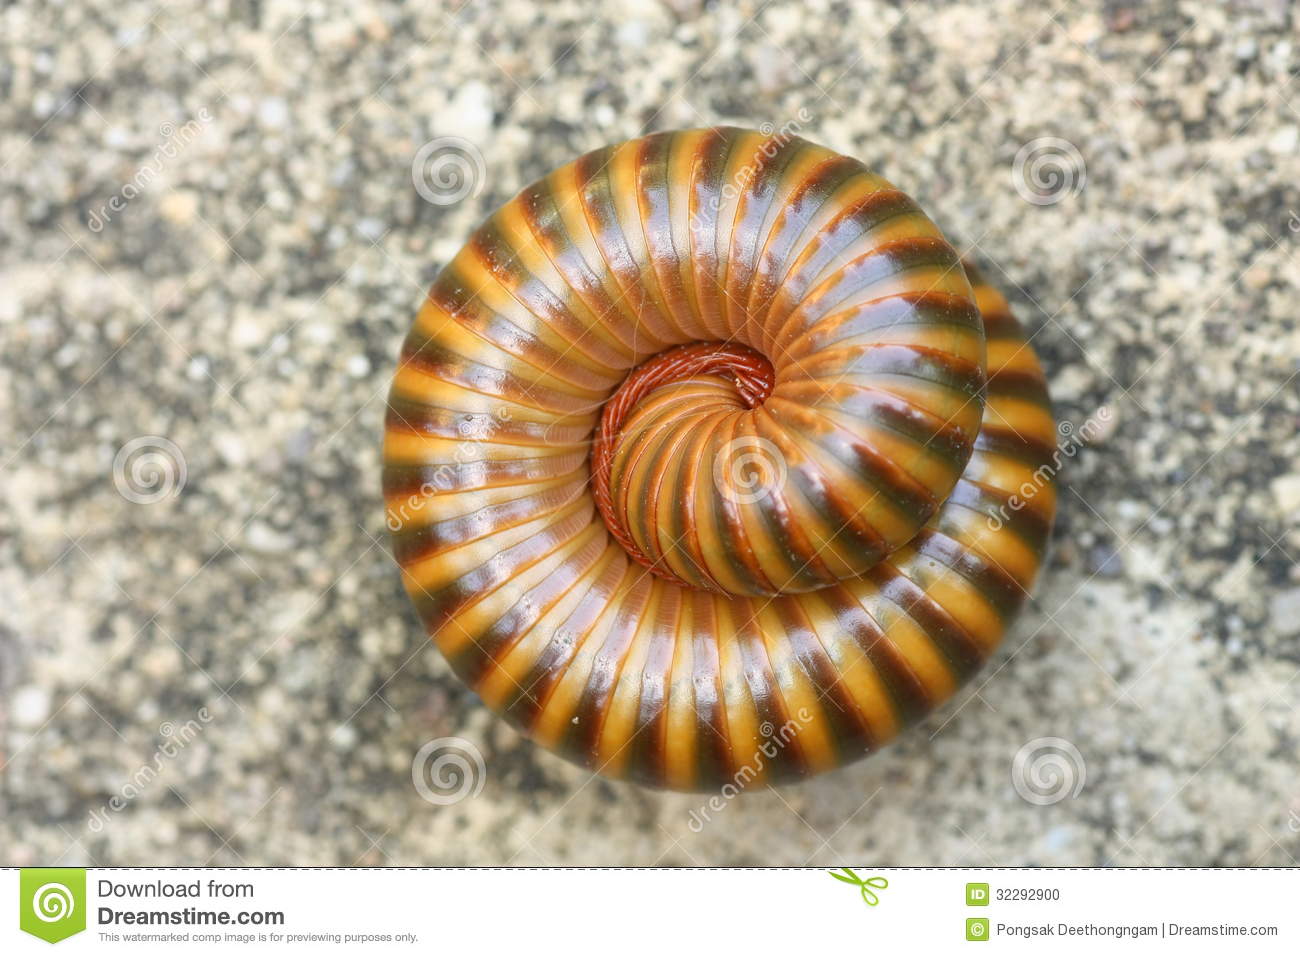 Millipedes Are Similar To Centipedes But Have Two Pairs Of Legs Per